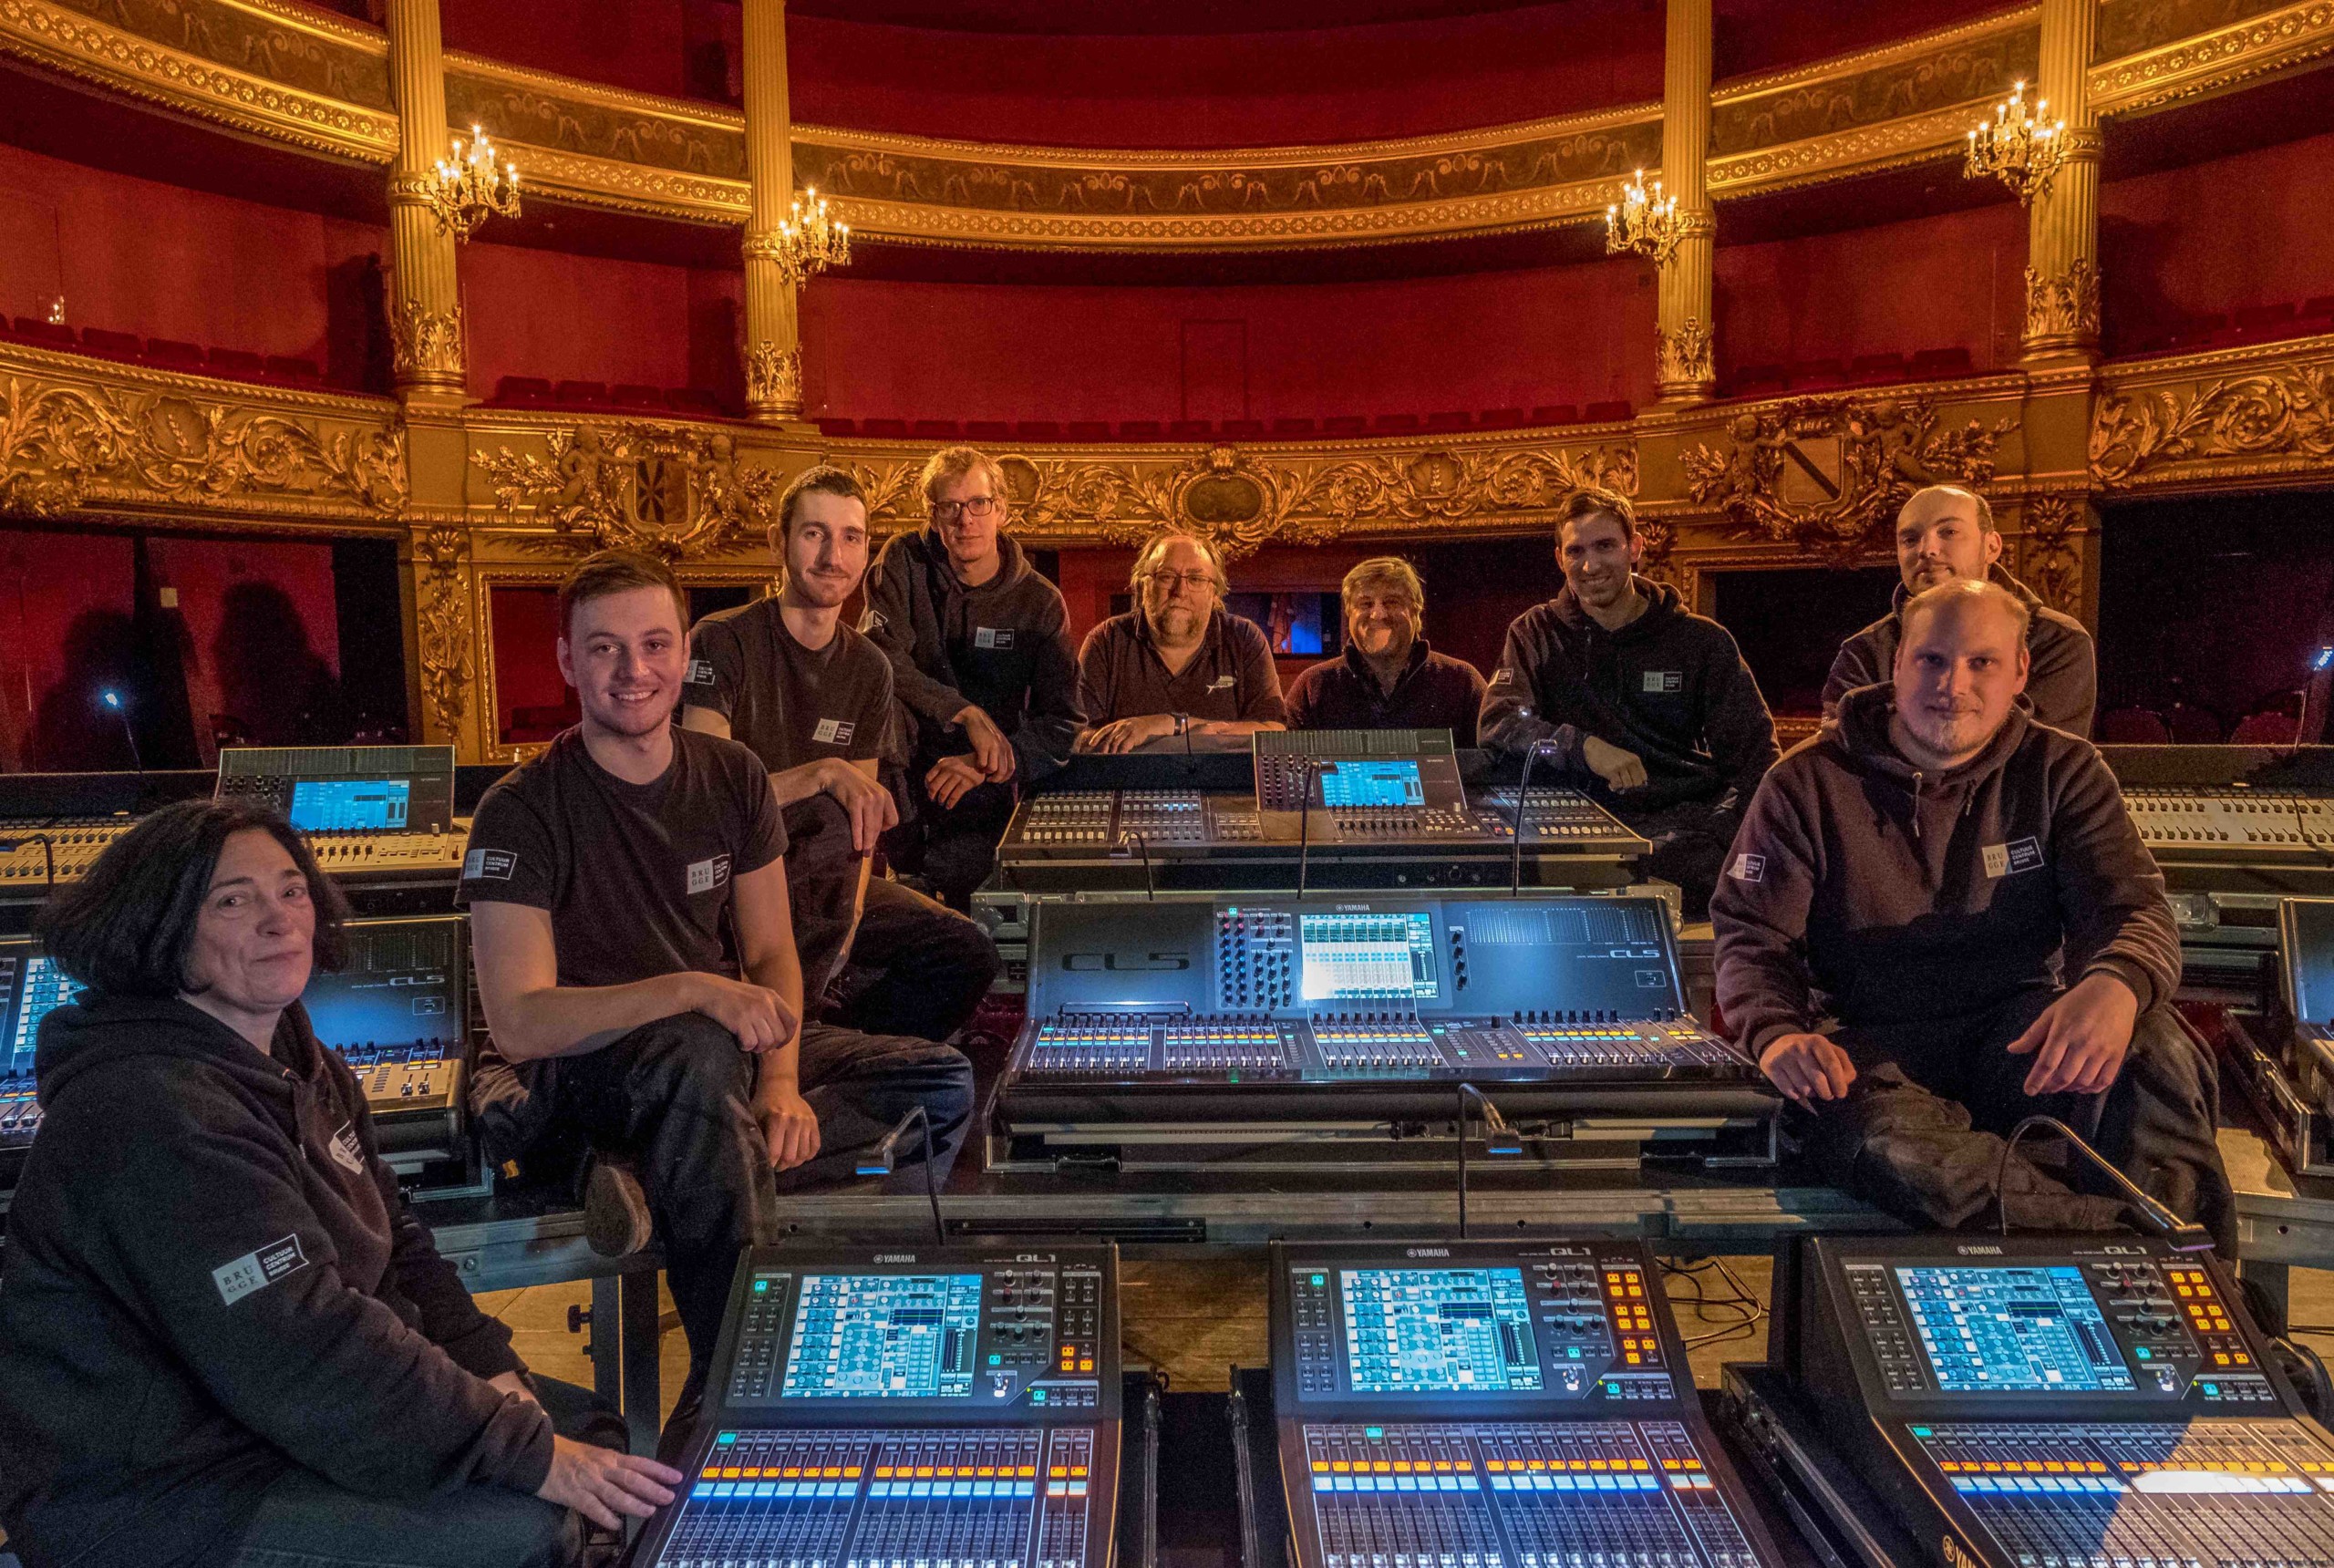 Cultuur Centrum Brugge Makes Major Investment In Yamaha Mixing Consoles